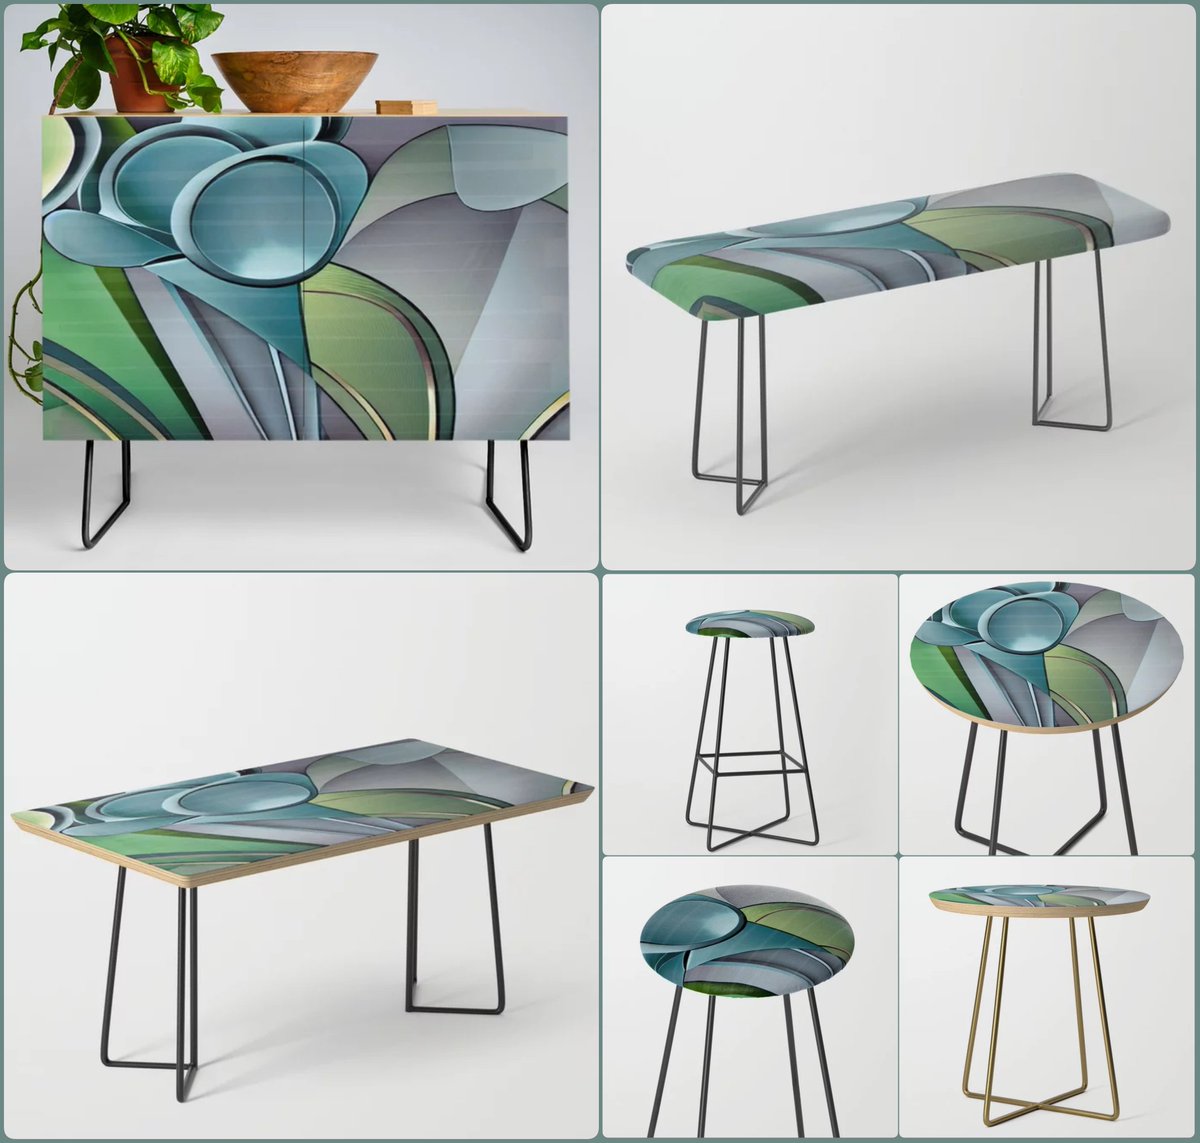 Fountain Sphere Furniture~by Art Falaxy~
~Unique Home Decor~
#artfalaxy #art #furniture #tables #homedecor #society6 #modern #Society6max #accents #interior #trendy #credenza #dressers #stools #coffee

COLLECTION: society6.com/art/fountain-s…